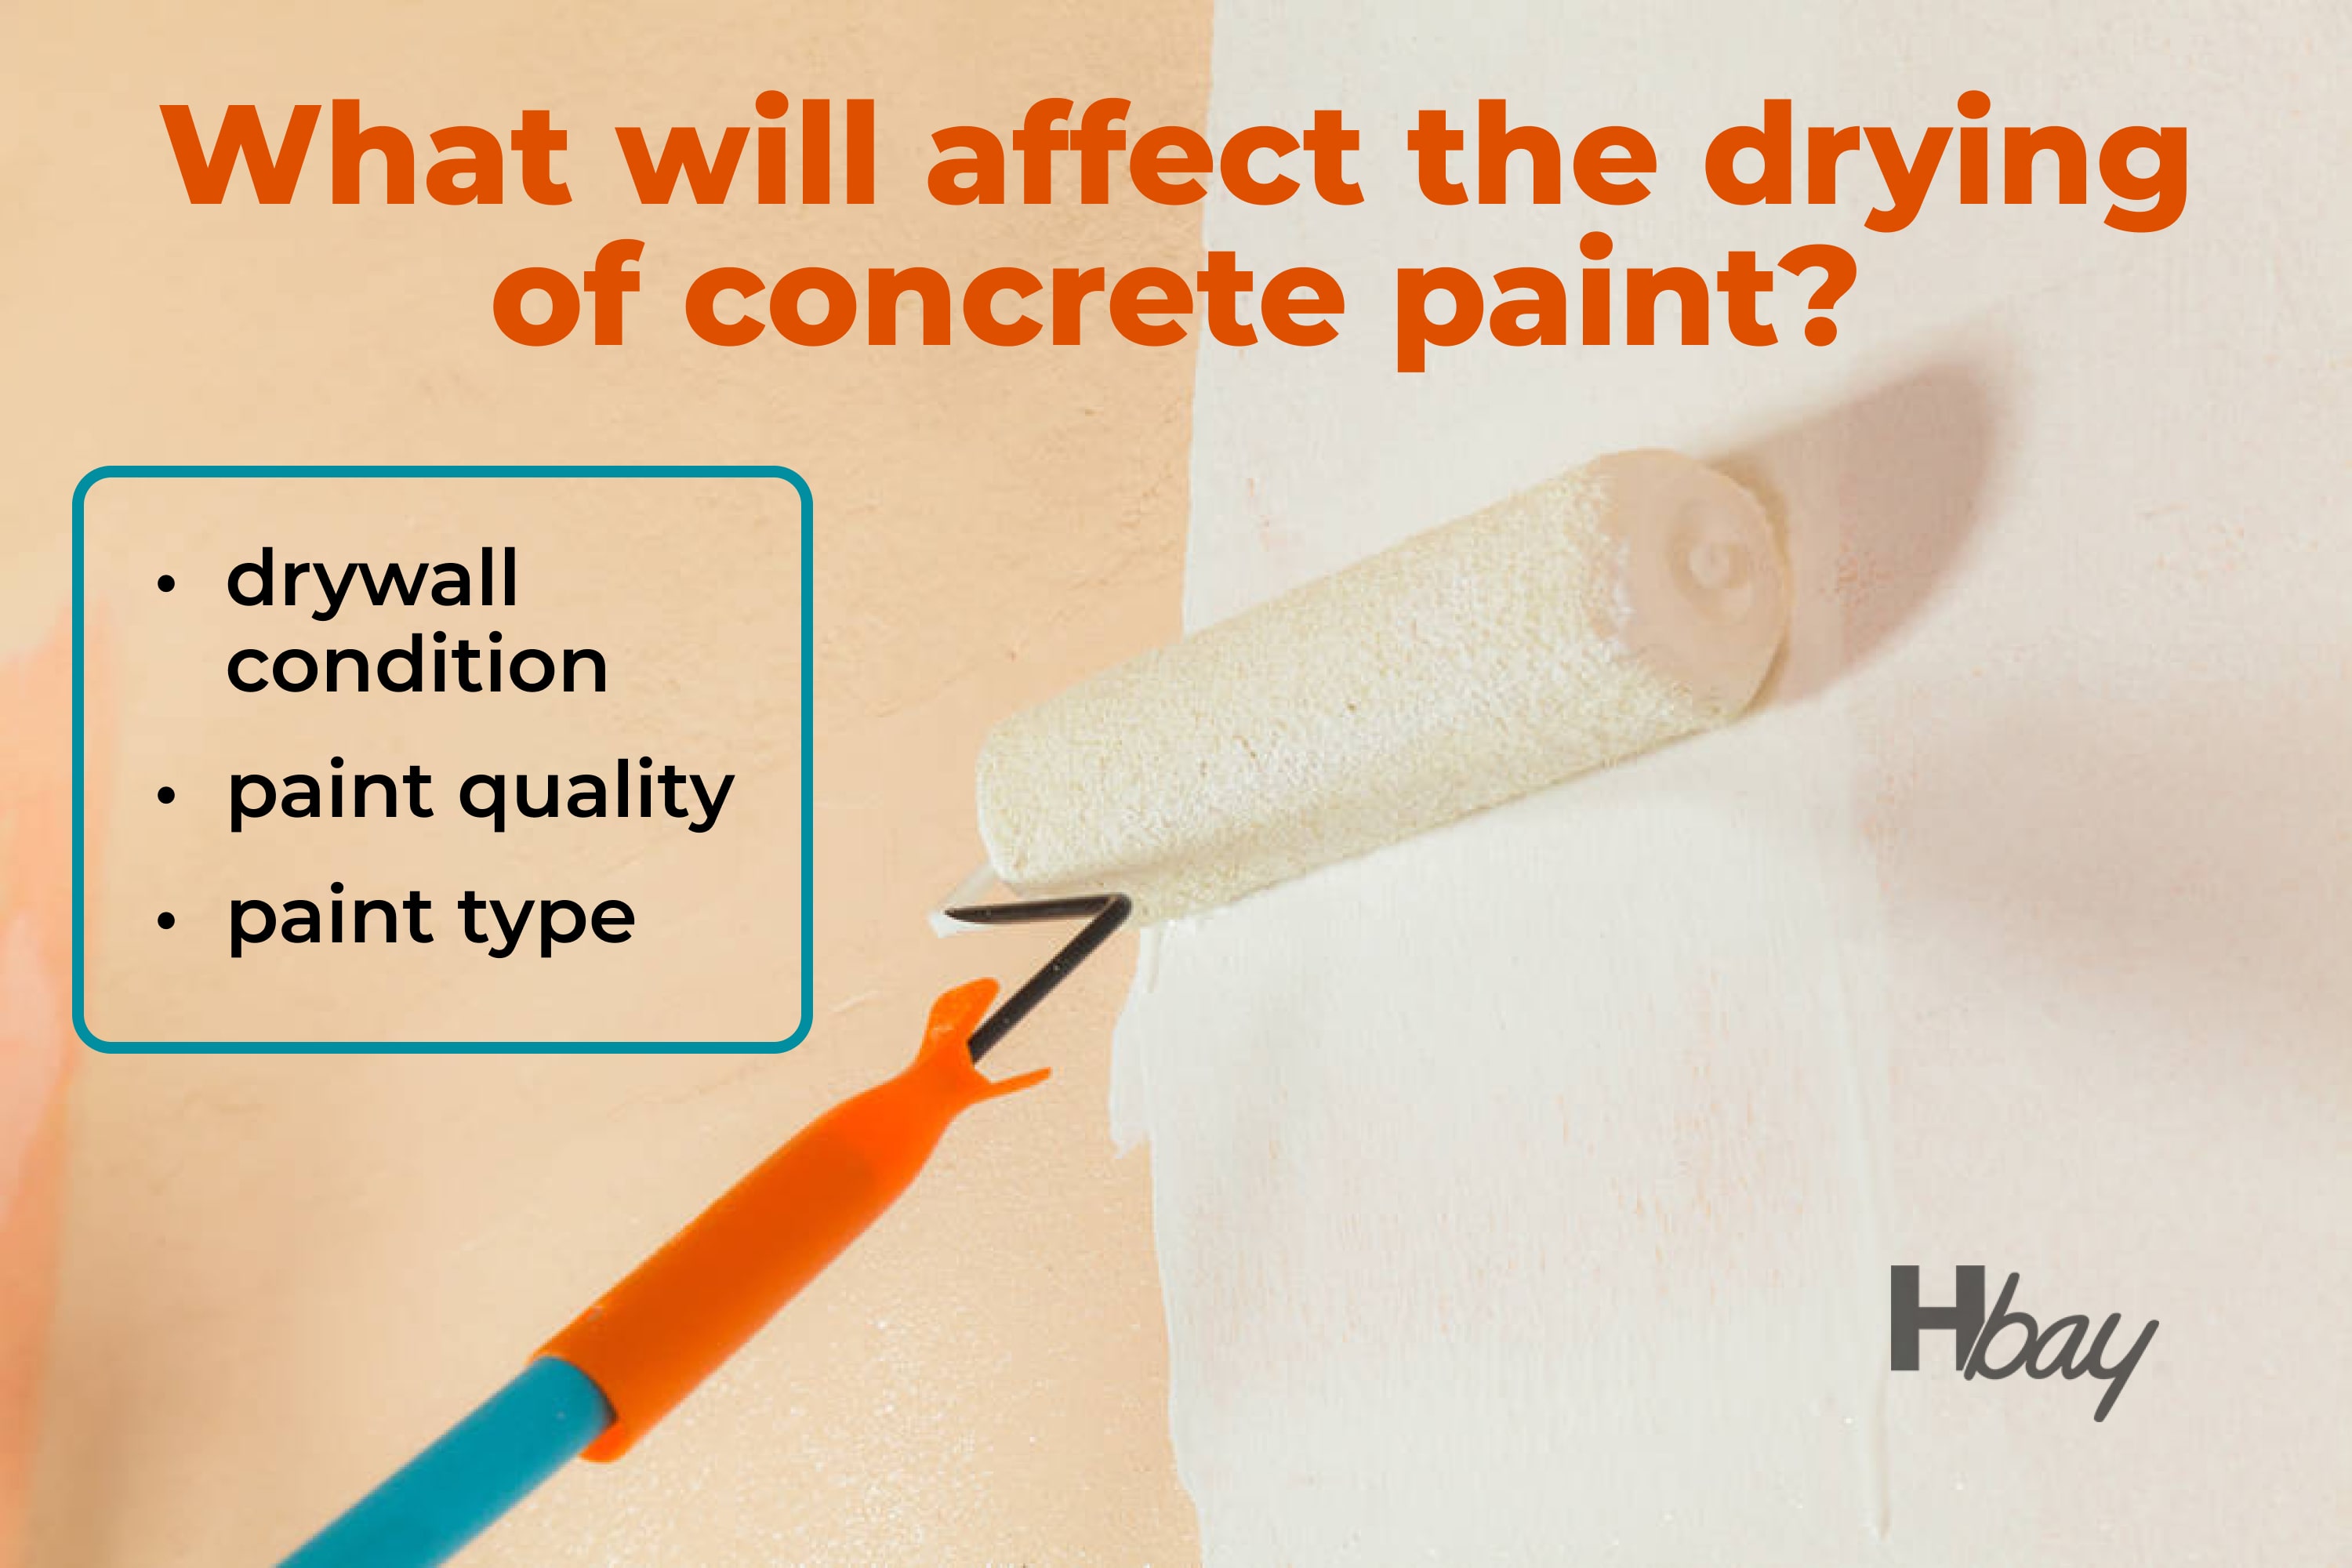 What will affect the drying of concrete paint